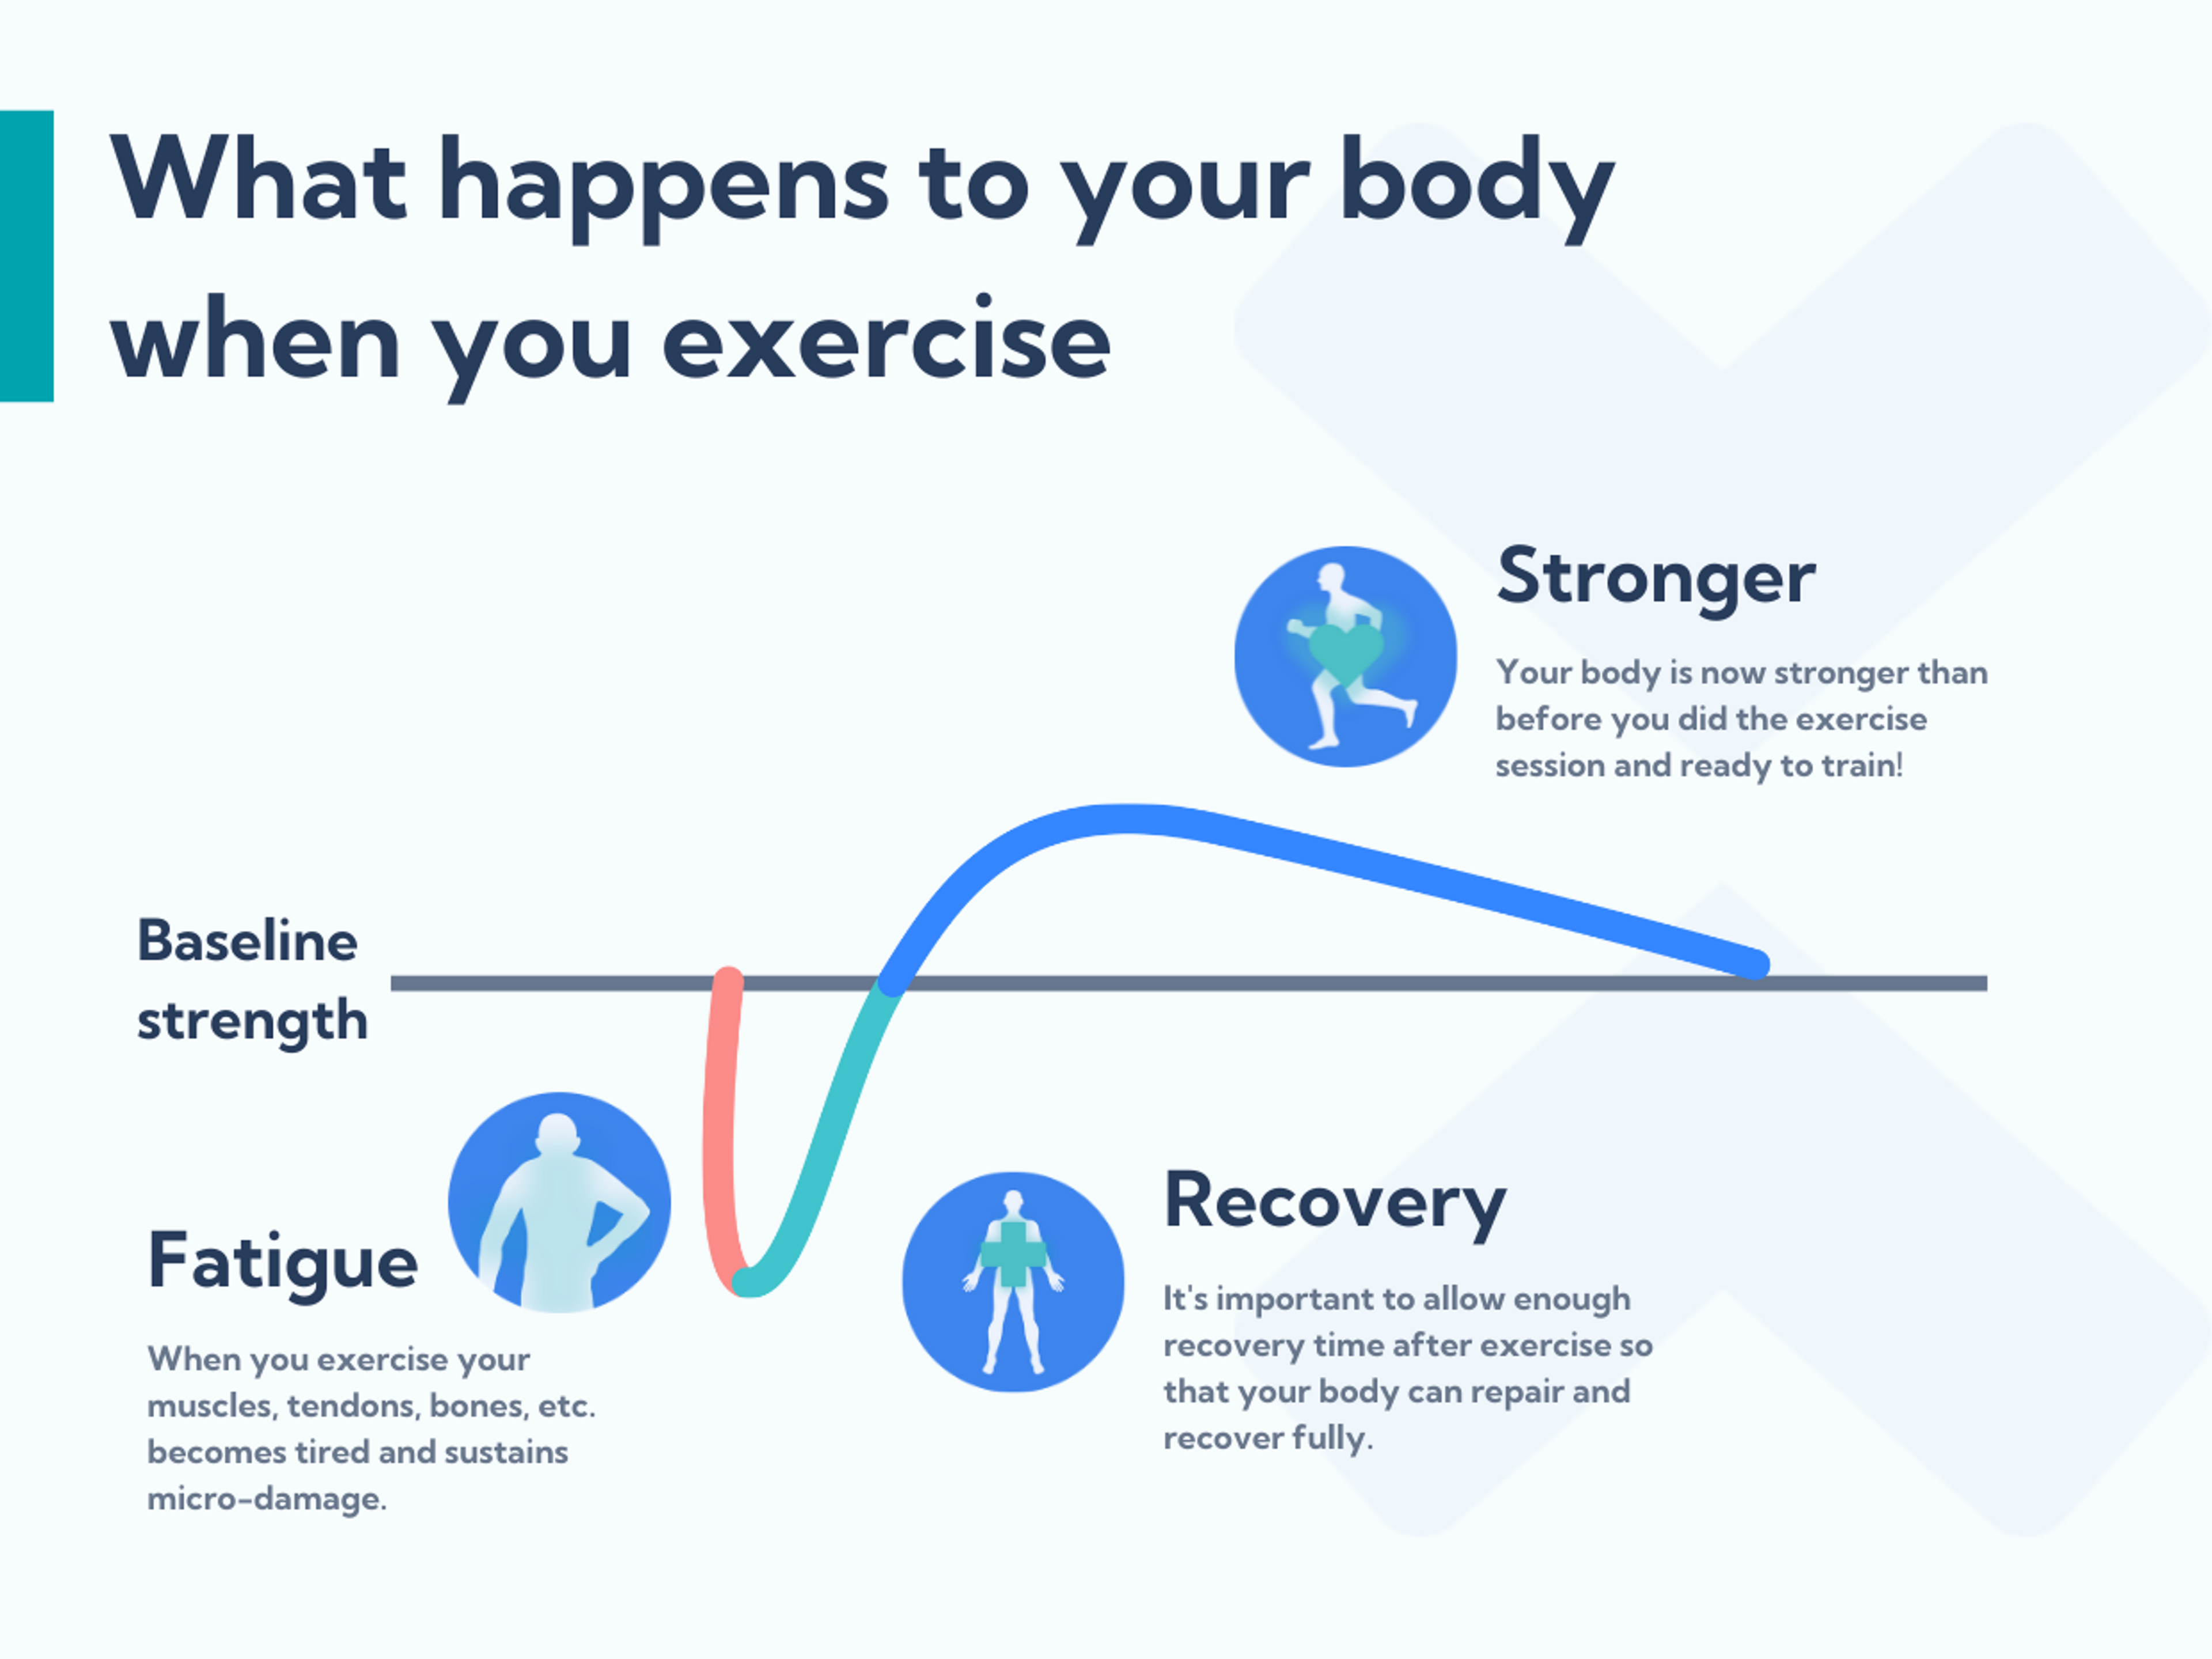 How your muscles, tendons and bones grow stronger through exercise.